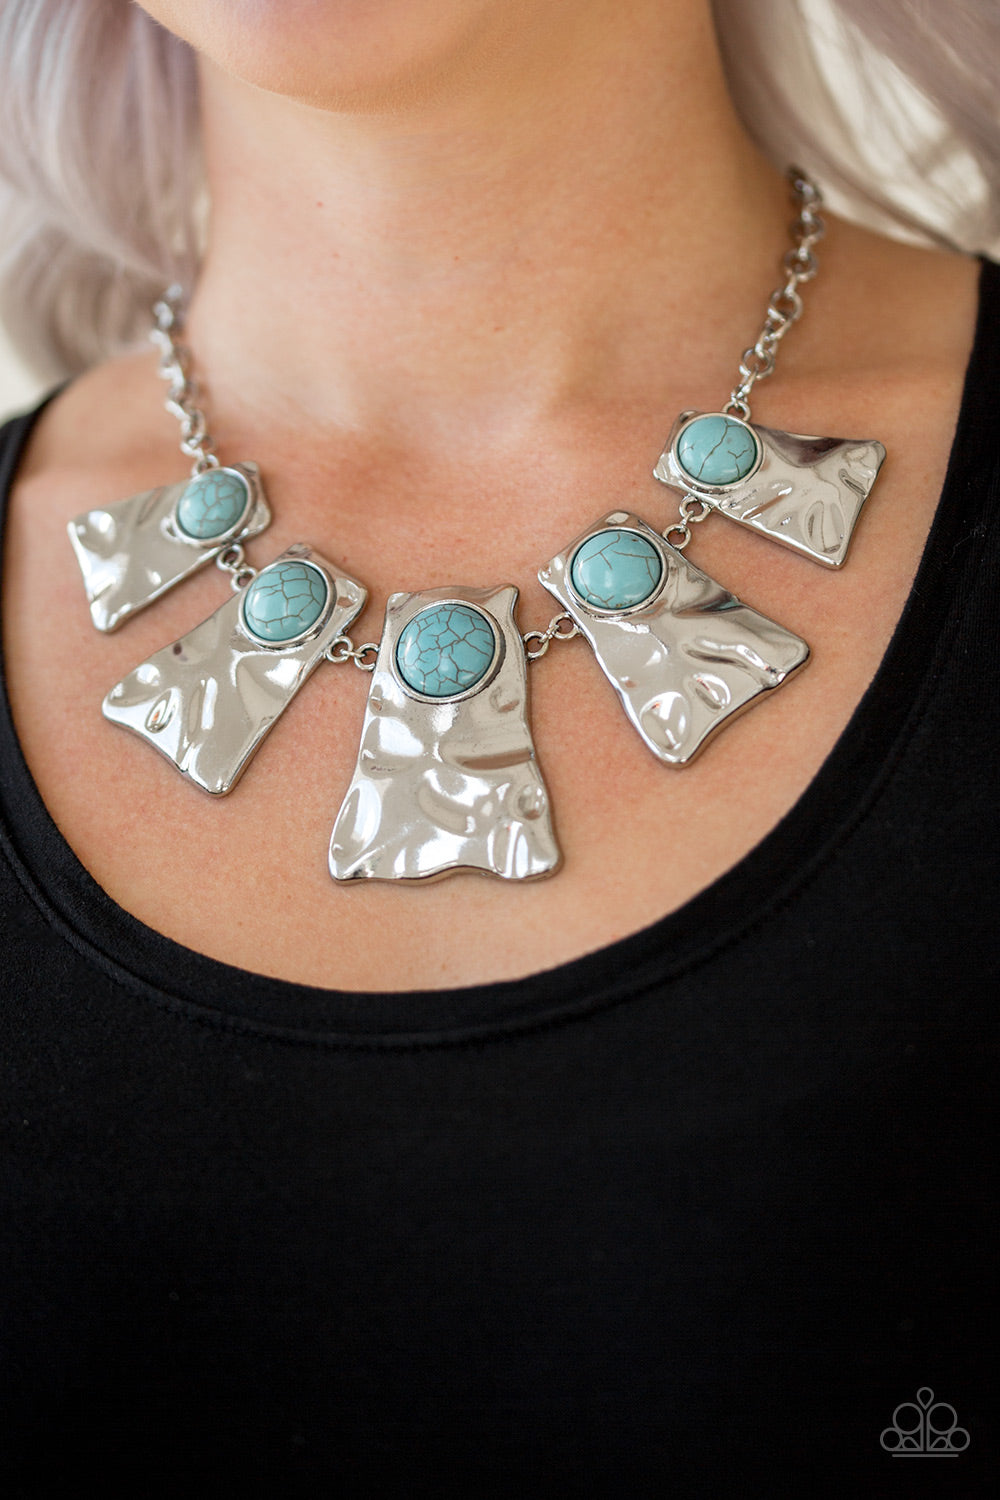 Cougar Blue Necklace - Paparazzi Accessories Item #JJG-N34 Rippling with hammered details, flared silver frames join below the collar, creating a fierce fringe. Refreshing turquoise stones are pressed into the tops of the frames for a colorful finish. Features an adjustable clasp closure. All Paparazzi Accessories are lead free and nickel free!  Sold as one individual necklace. Includes one pair of matching earrings.